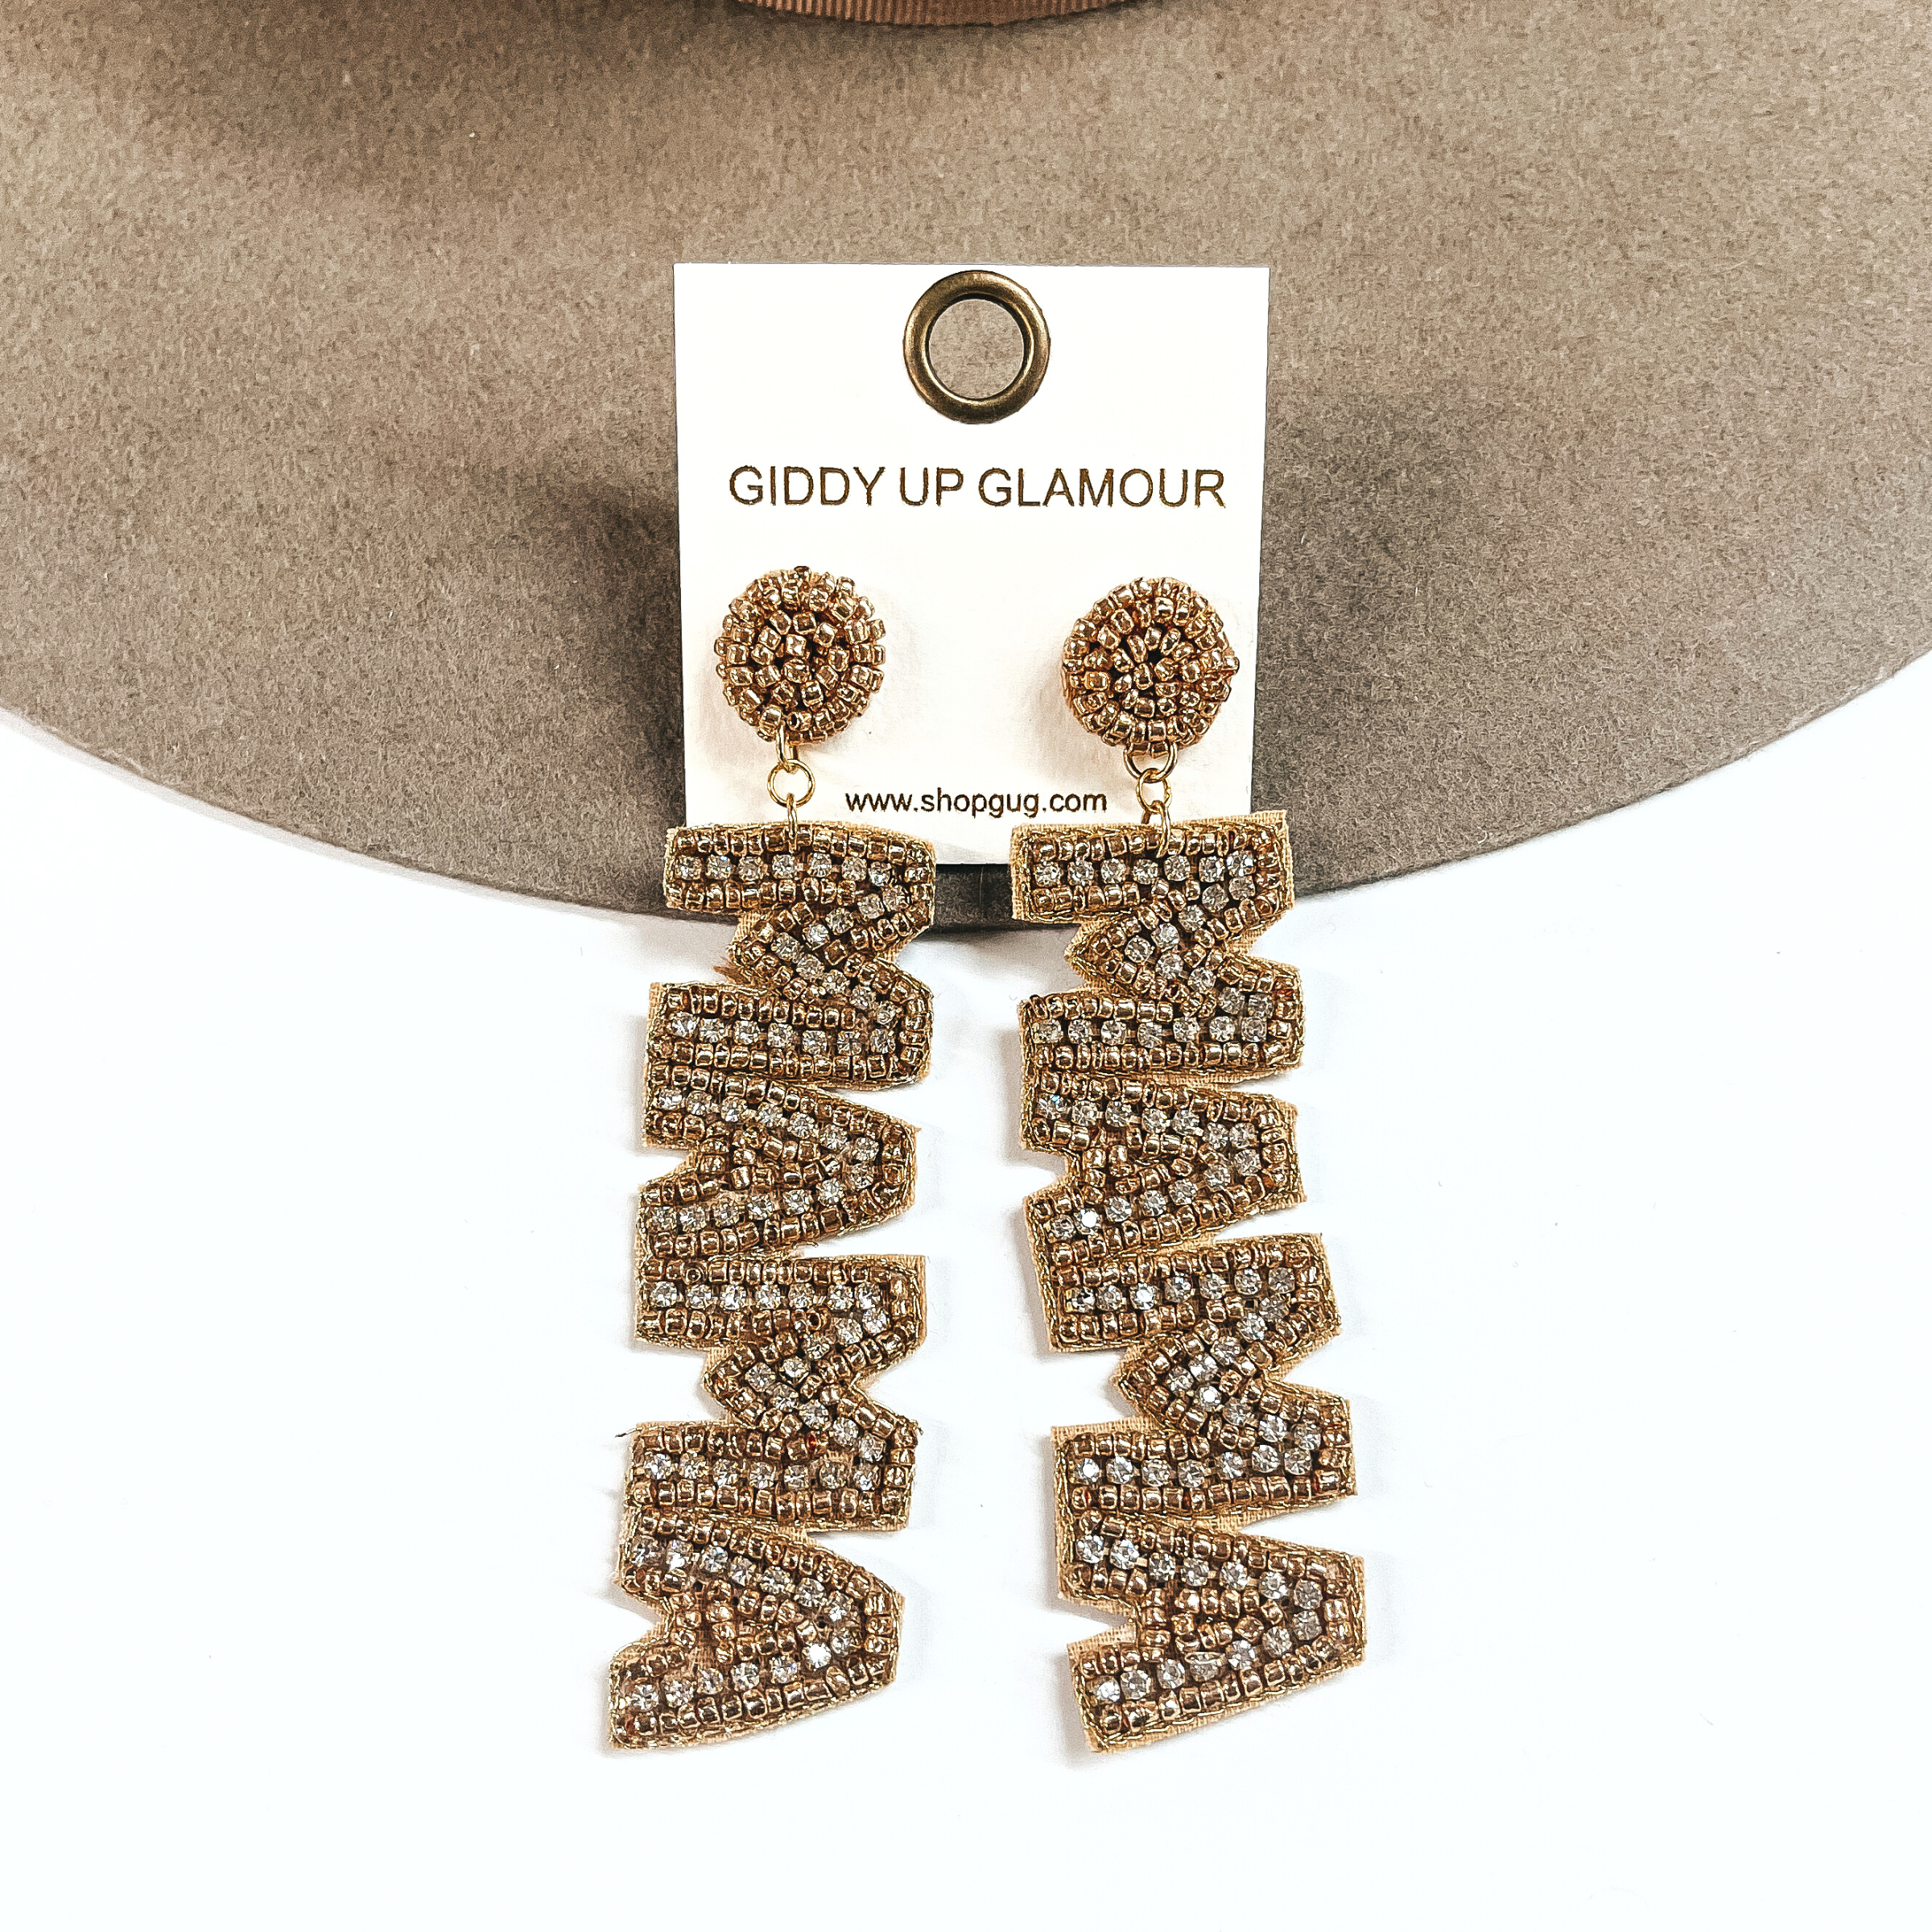 These are gold beaded and clear crystal earrings with a drop that says, MAMA. These earrings are taken on a light brown felt hat brim and on a white background.